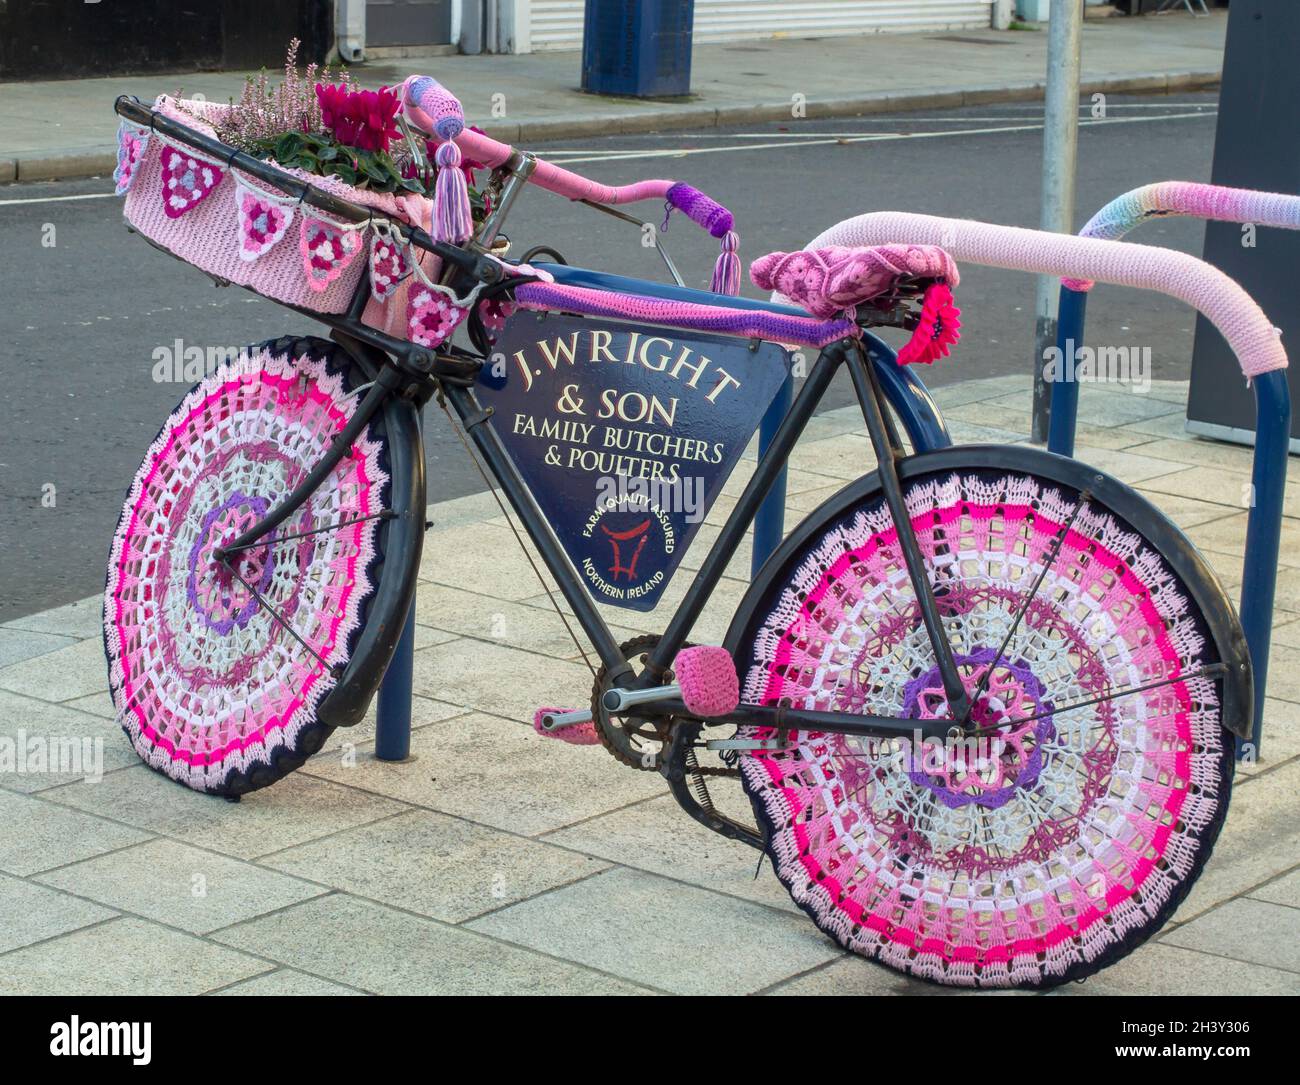 30 October 2021 Donaghadee County Down Northern Ireland A vintage buther's bike with crochet needle work used for advertising a small family butchers Stock Photo